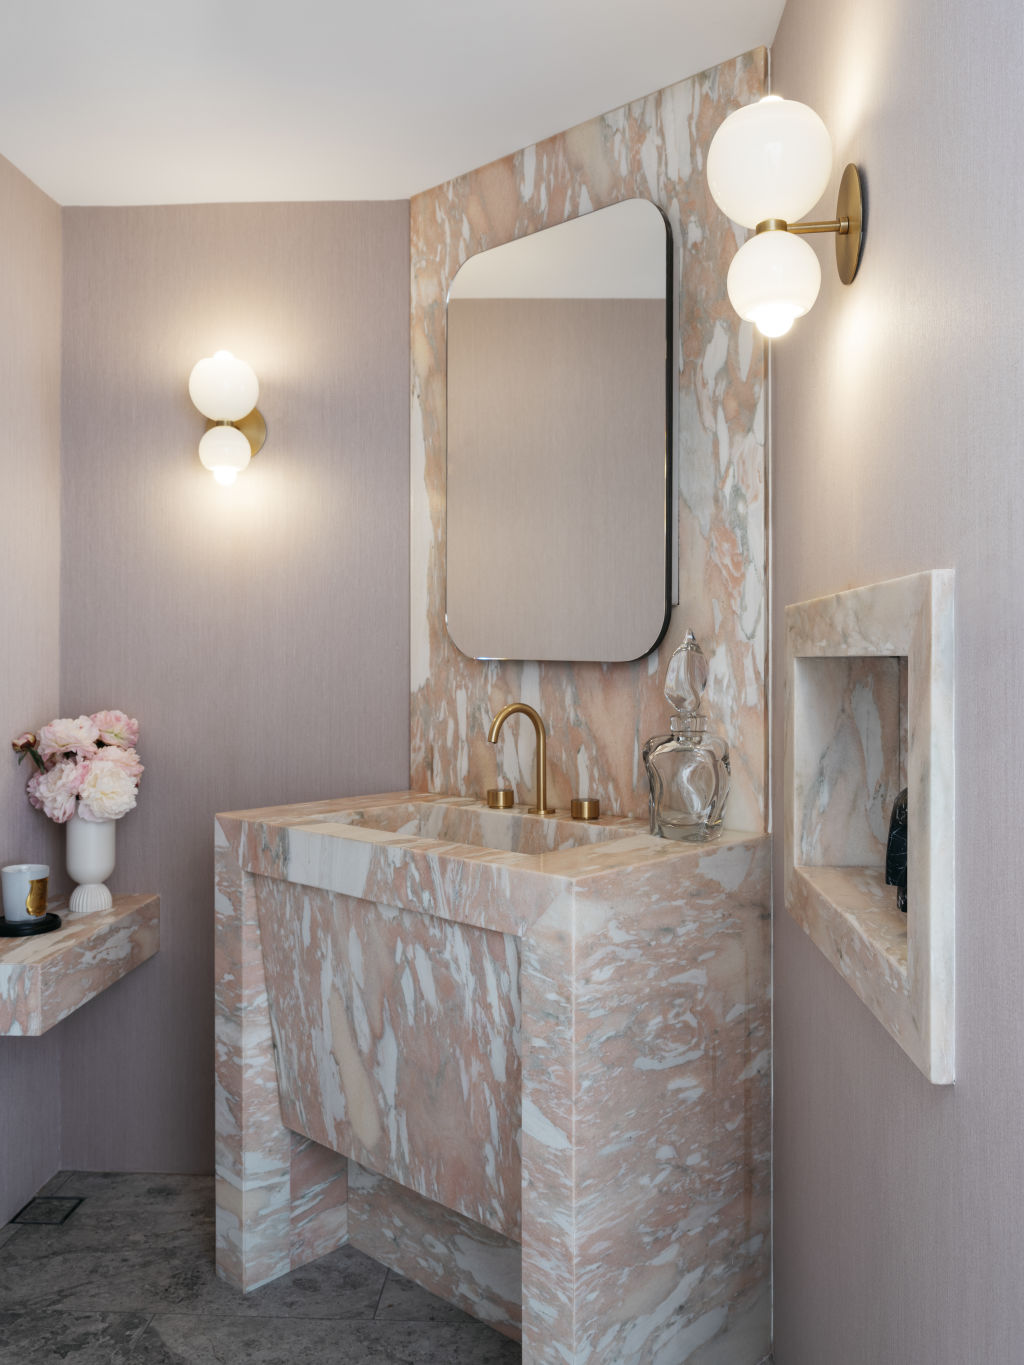 Beautiful archways provide glimpses into adjacent spaces, including a pretty pink powder room. Photo: Felix Forest